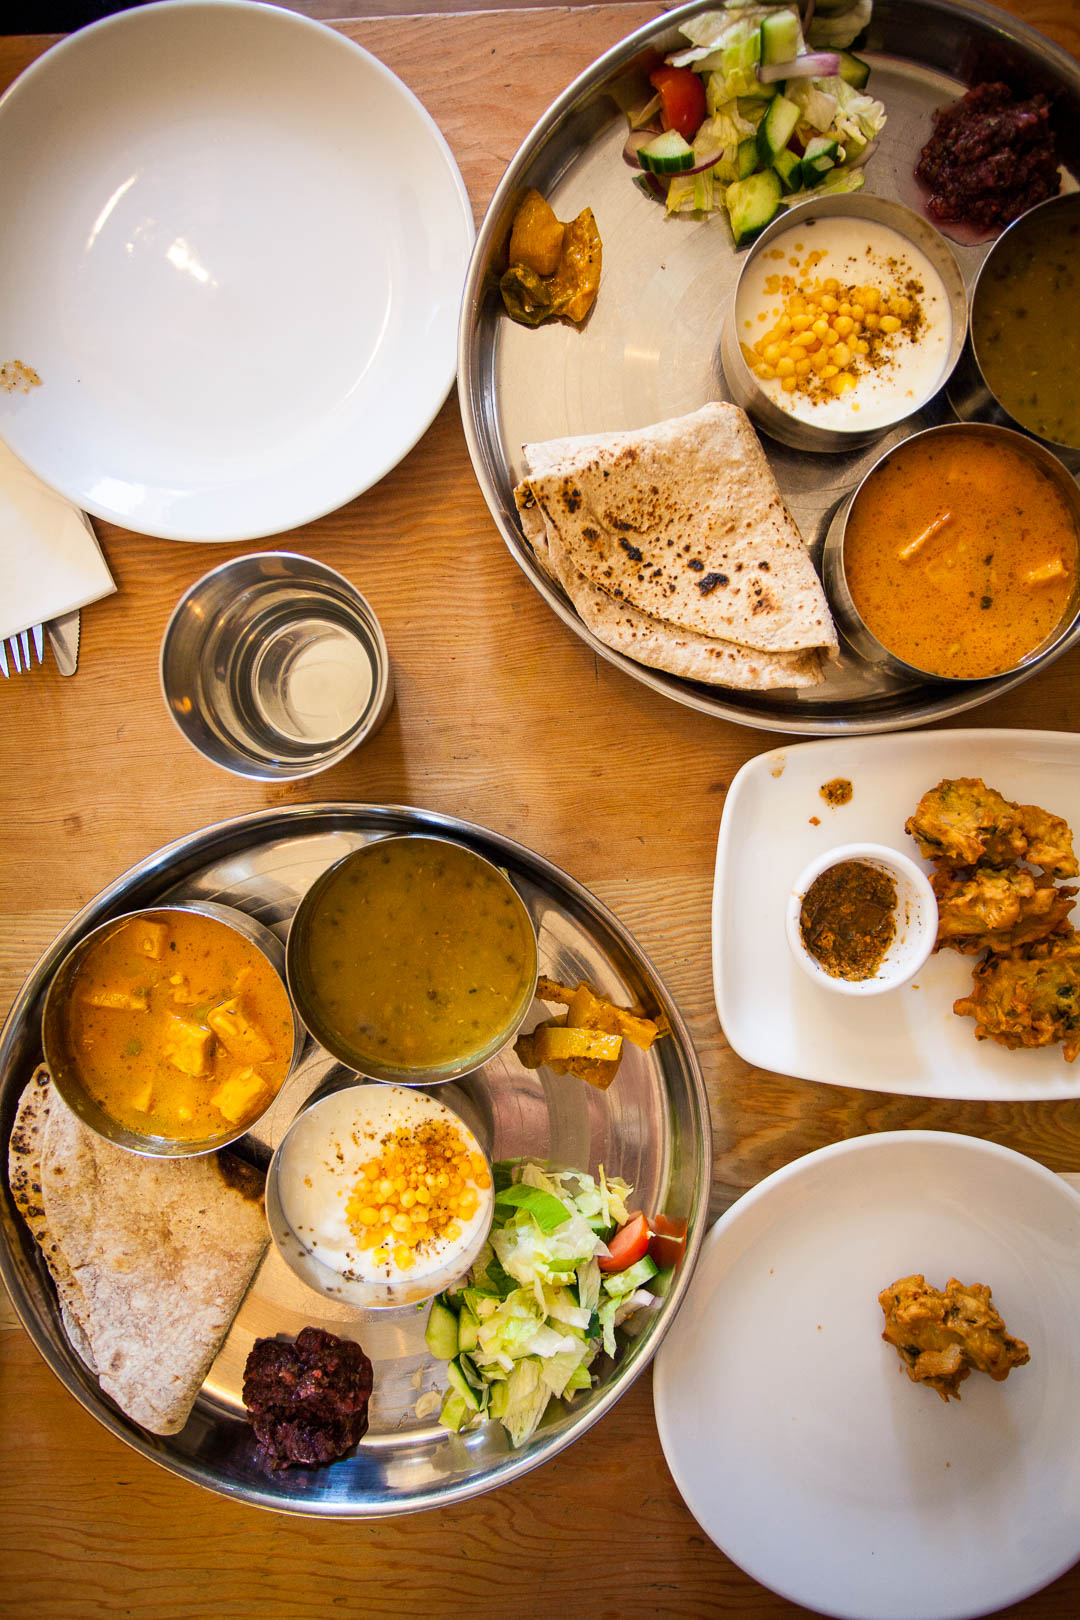 Restaurant Review: Ranjit's Kitchen Glasgow | Ranjit's Kitchen Glasgow is a family-run vegetarian restaurant serving authentic Panjabi food. The menu is simple and minimalistic, offering only what you would find in a traditional Panjabi household on a daily basis, such as daal, sabji, pakora and paranthas, with lots of vegan options.